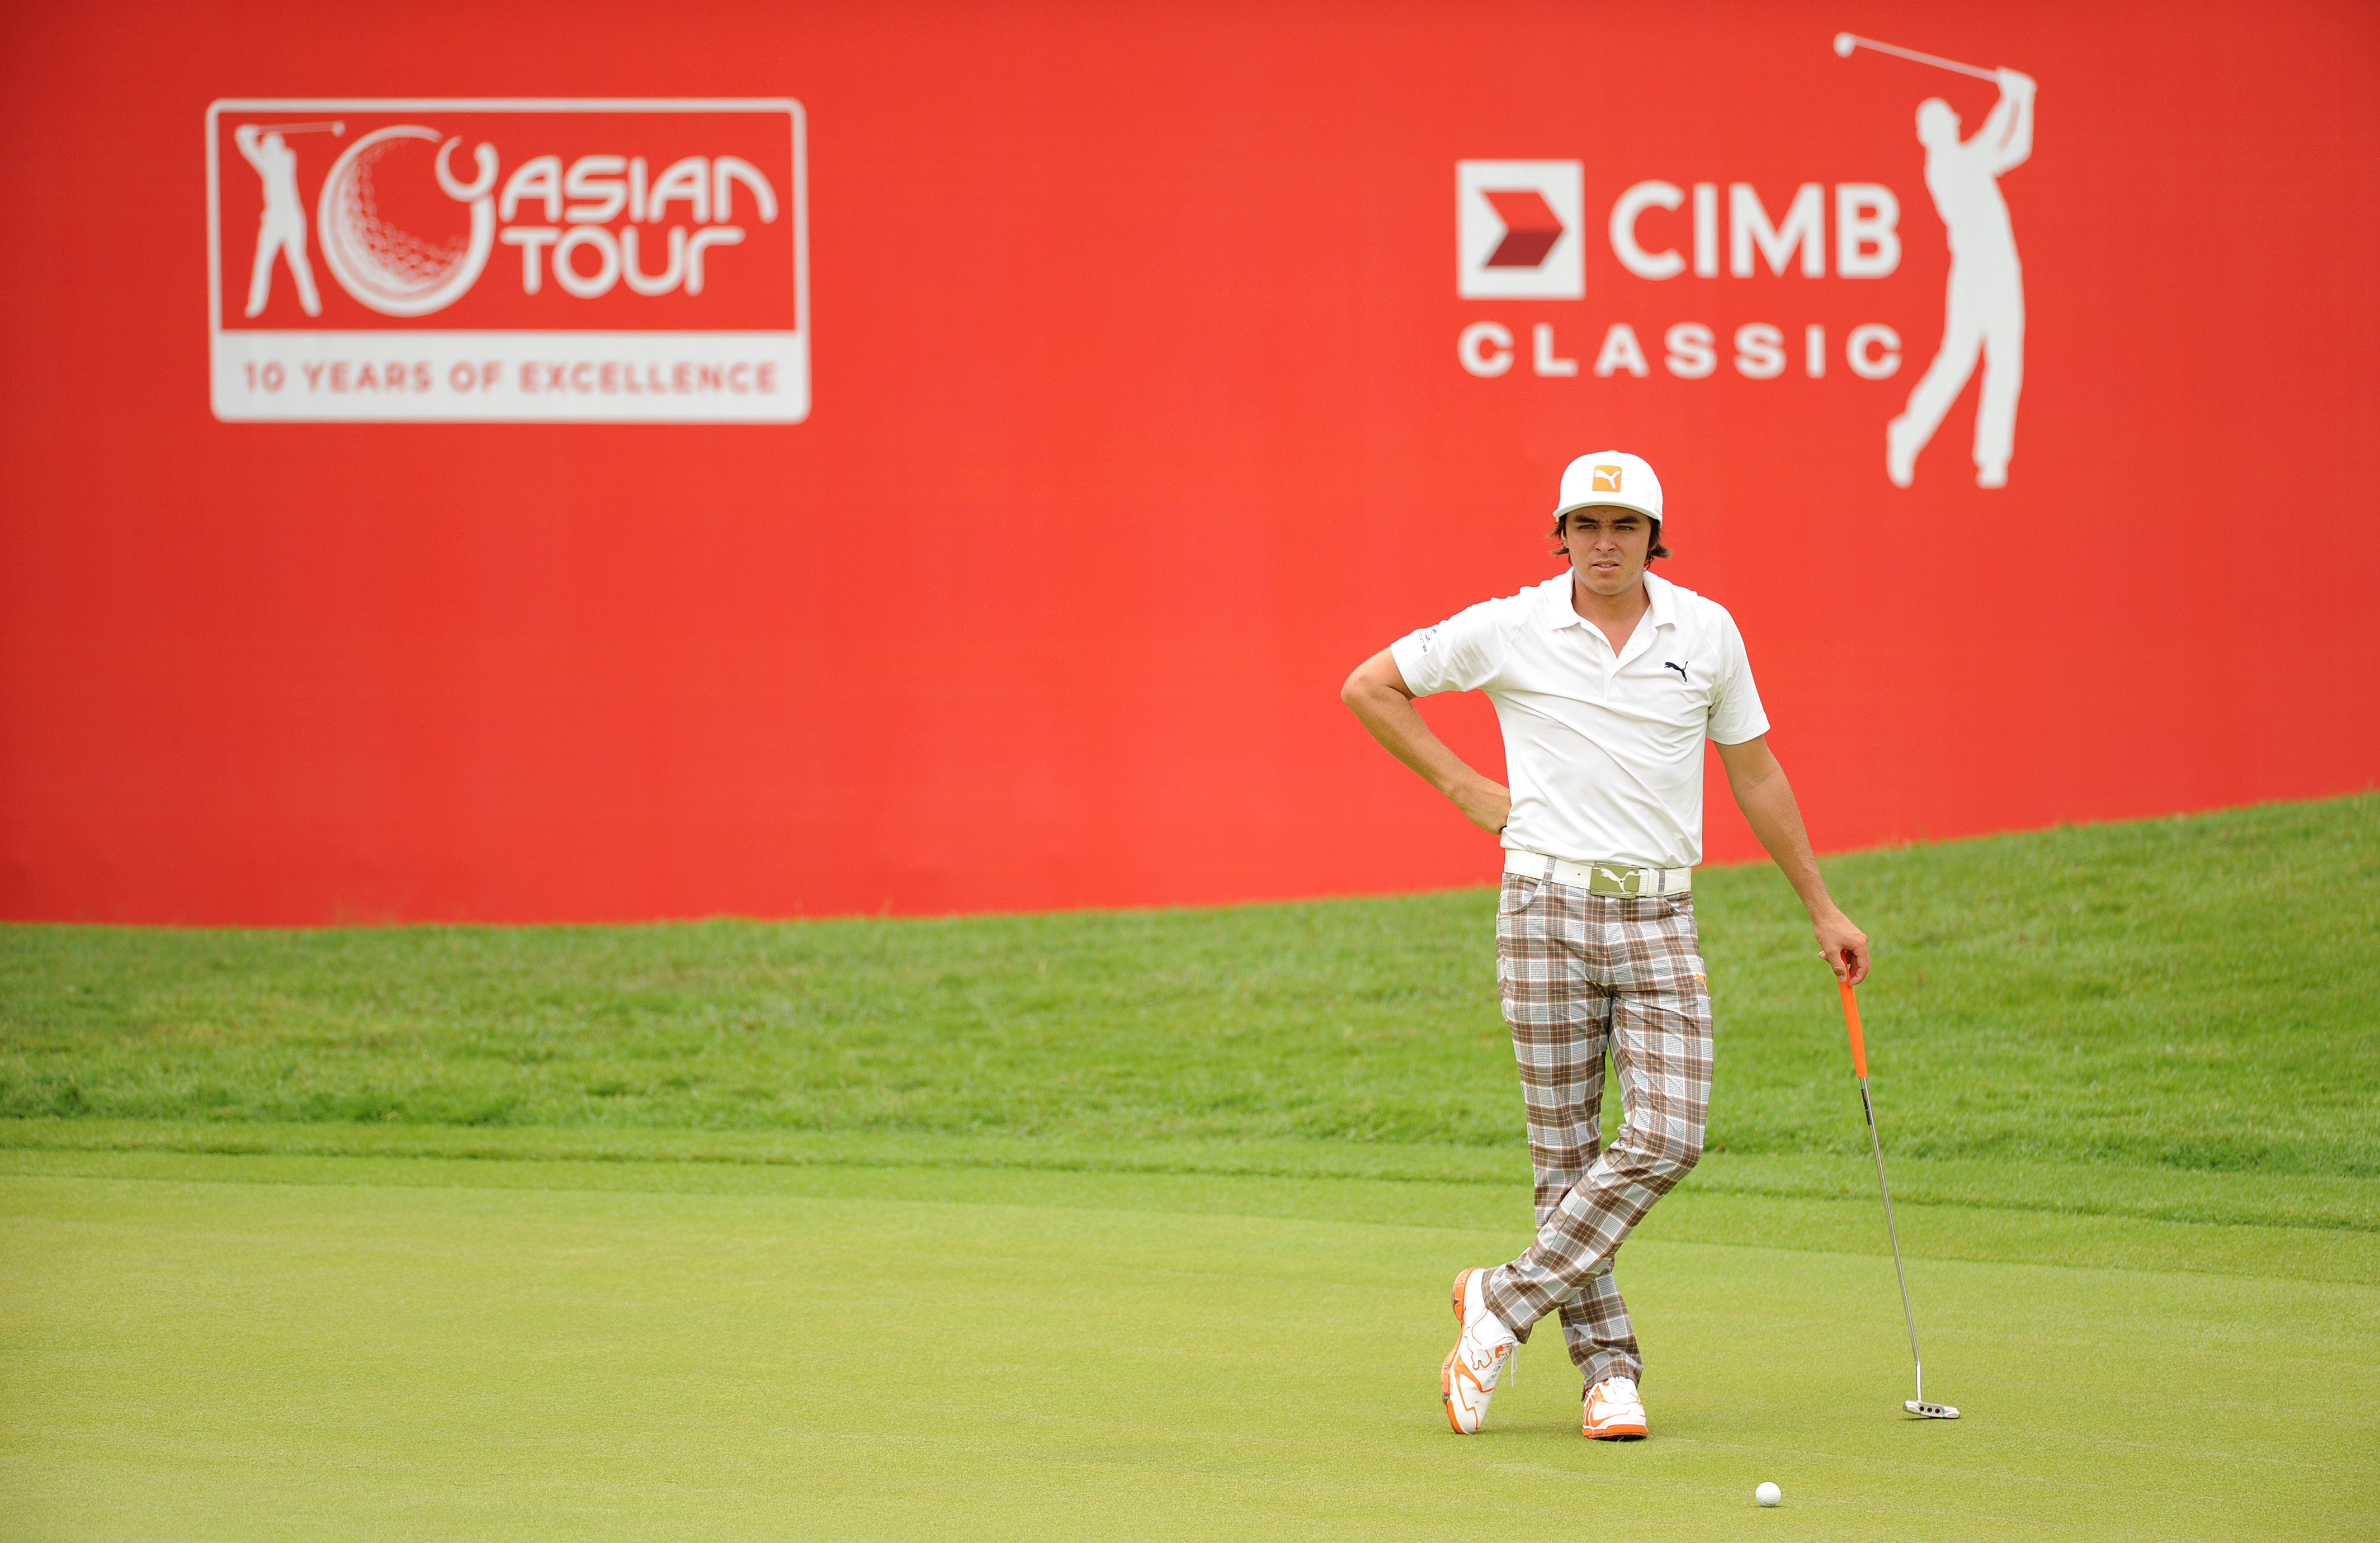 CIMB Classic: Preview What They Said | Asian Tour – Professional ...